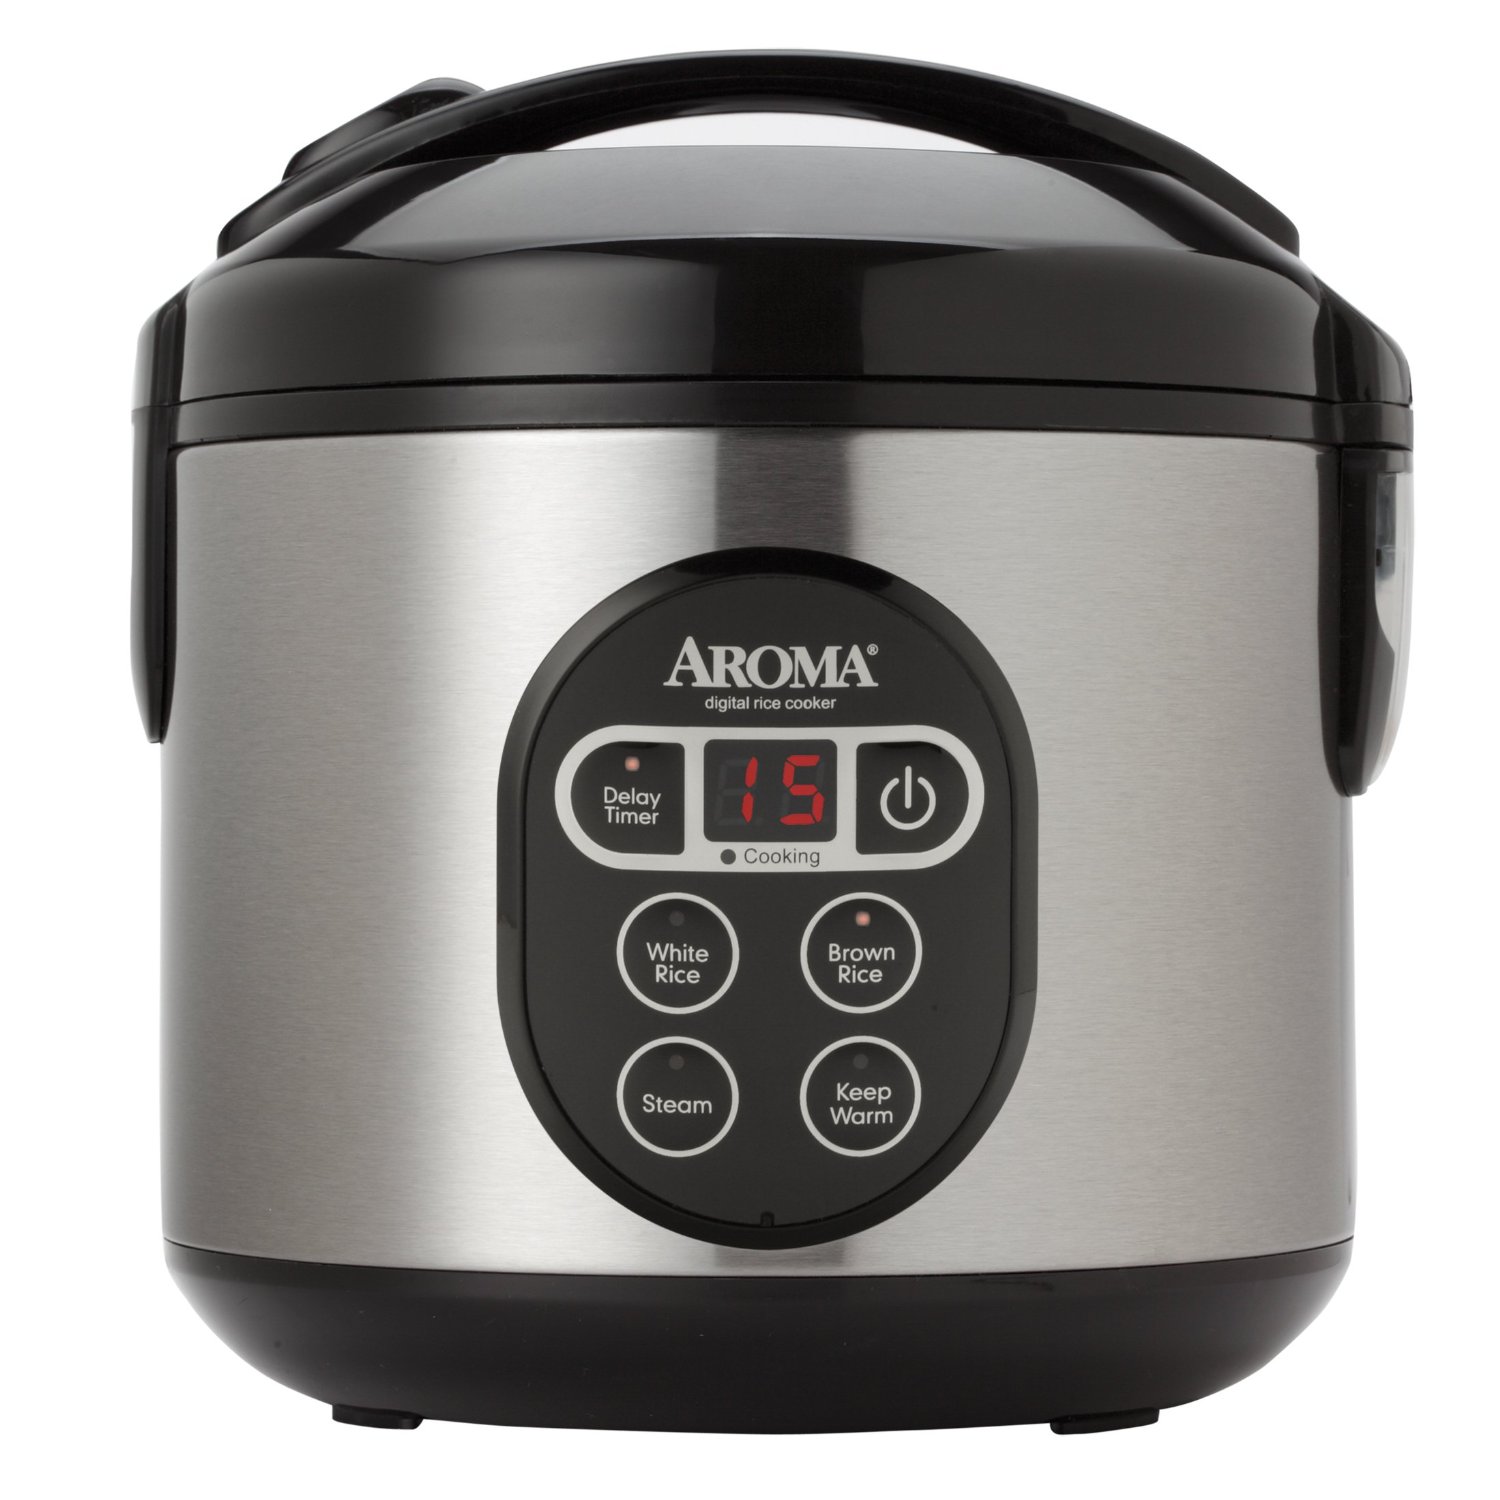 6 Best rice cookers for under $50 as of 2021 - Slant